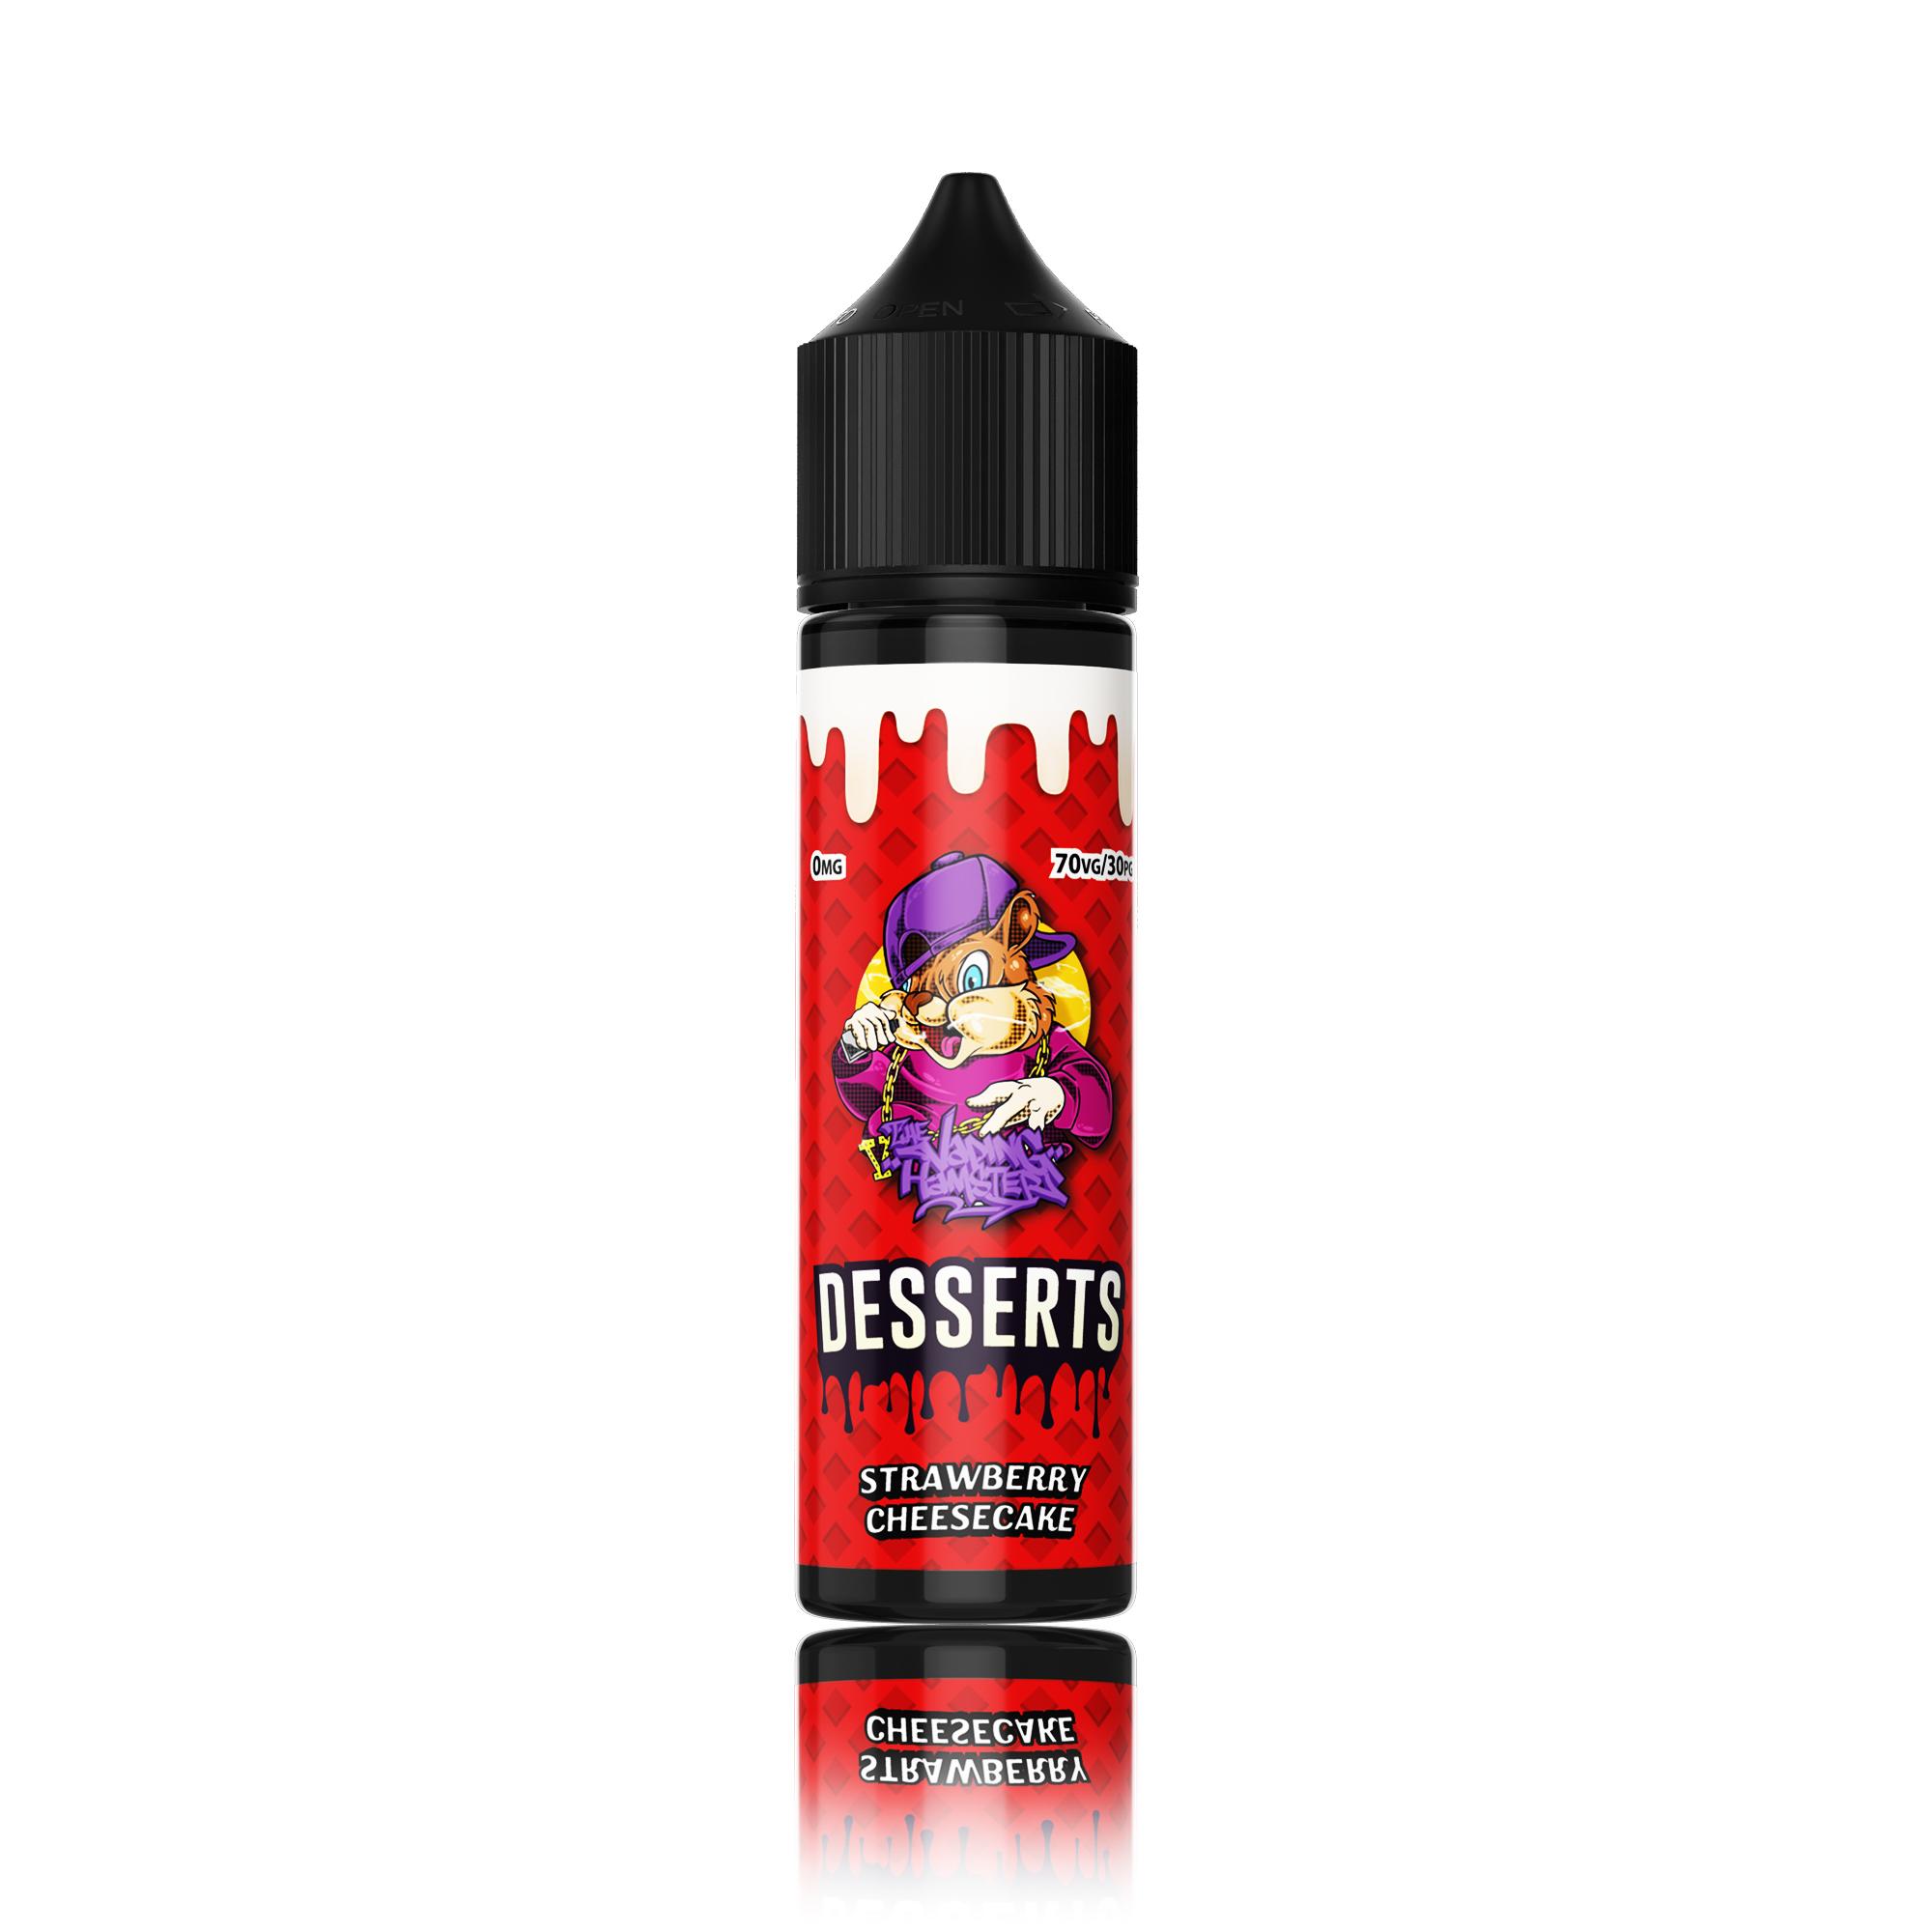 Strawberry Cheesecake by The Vaping Hamster